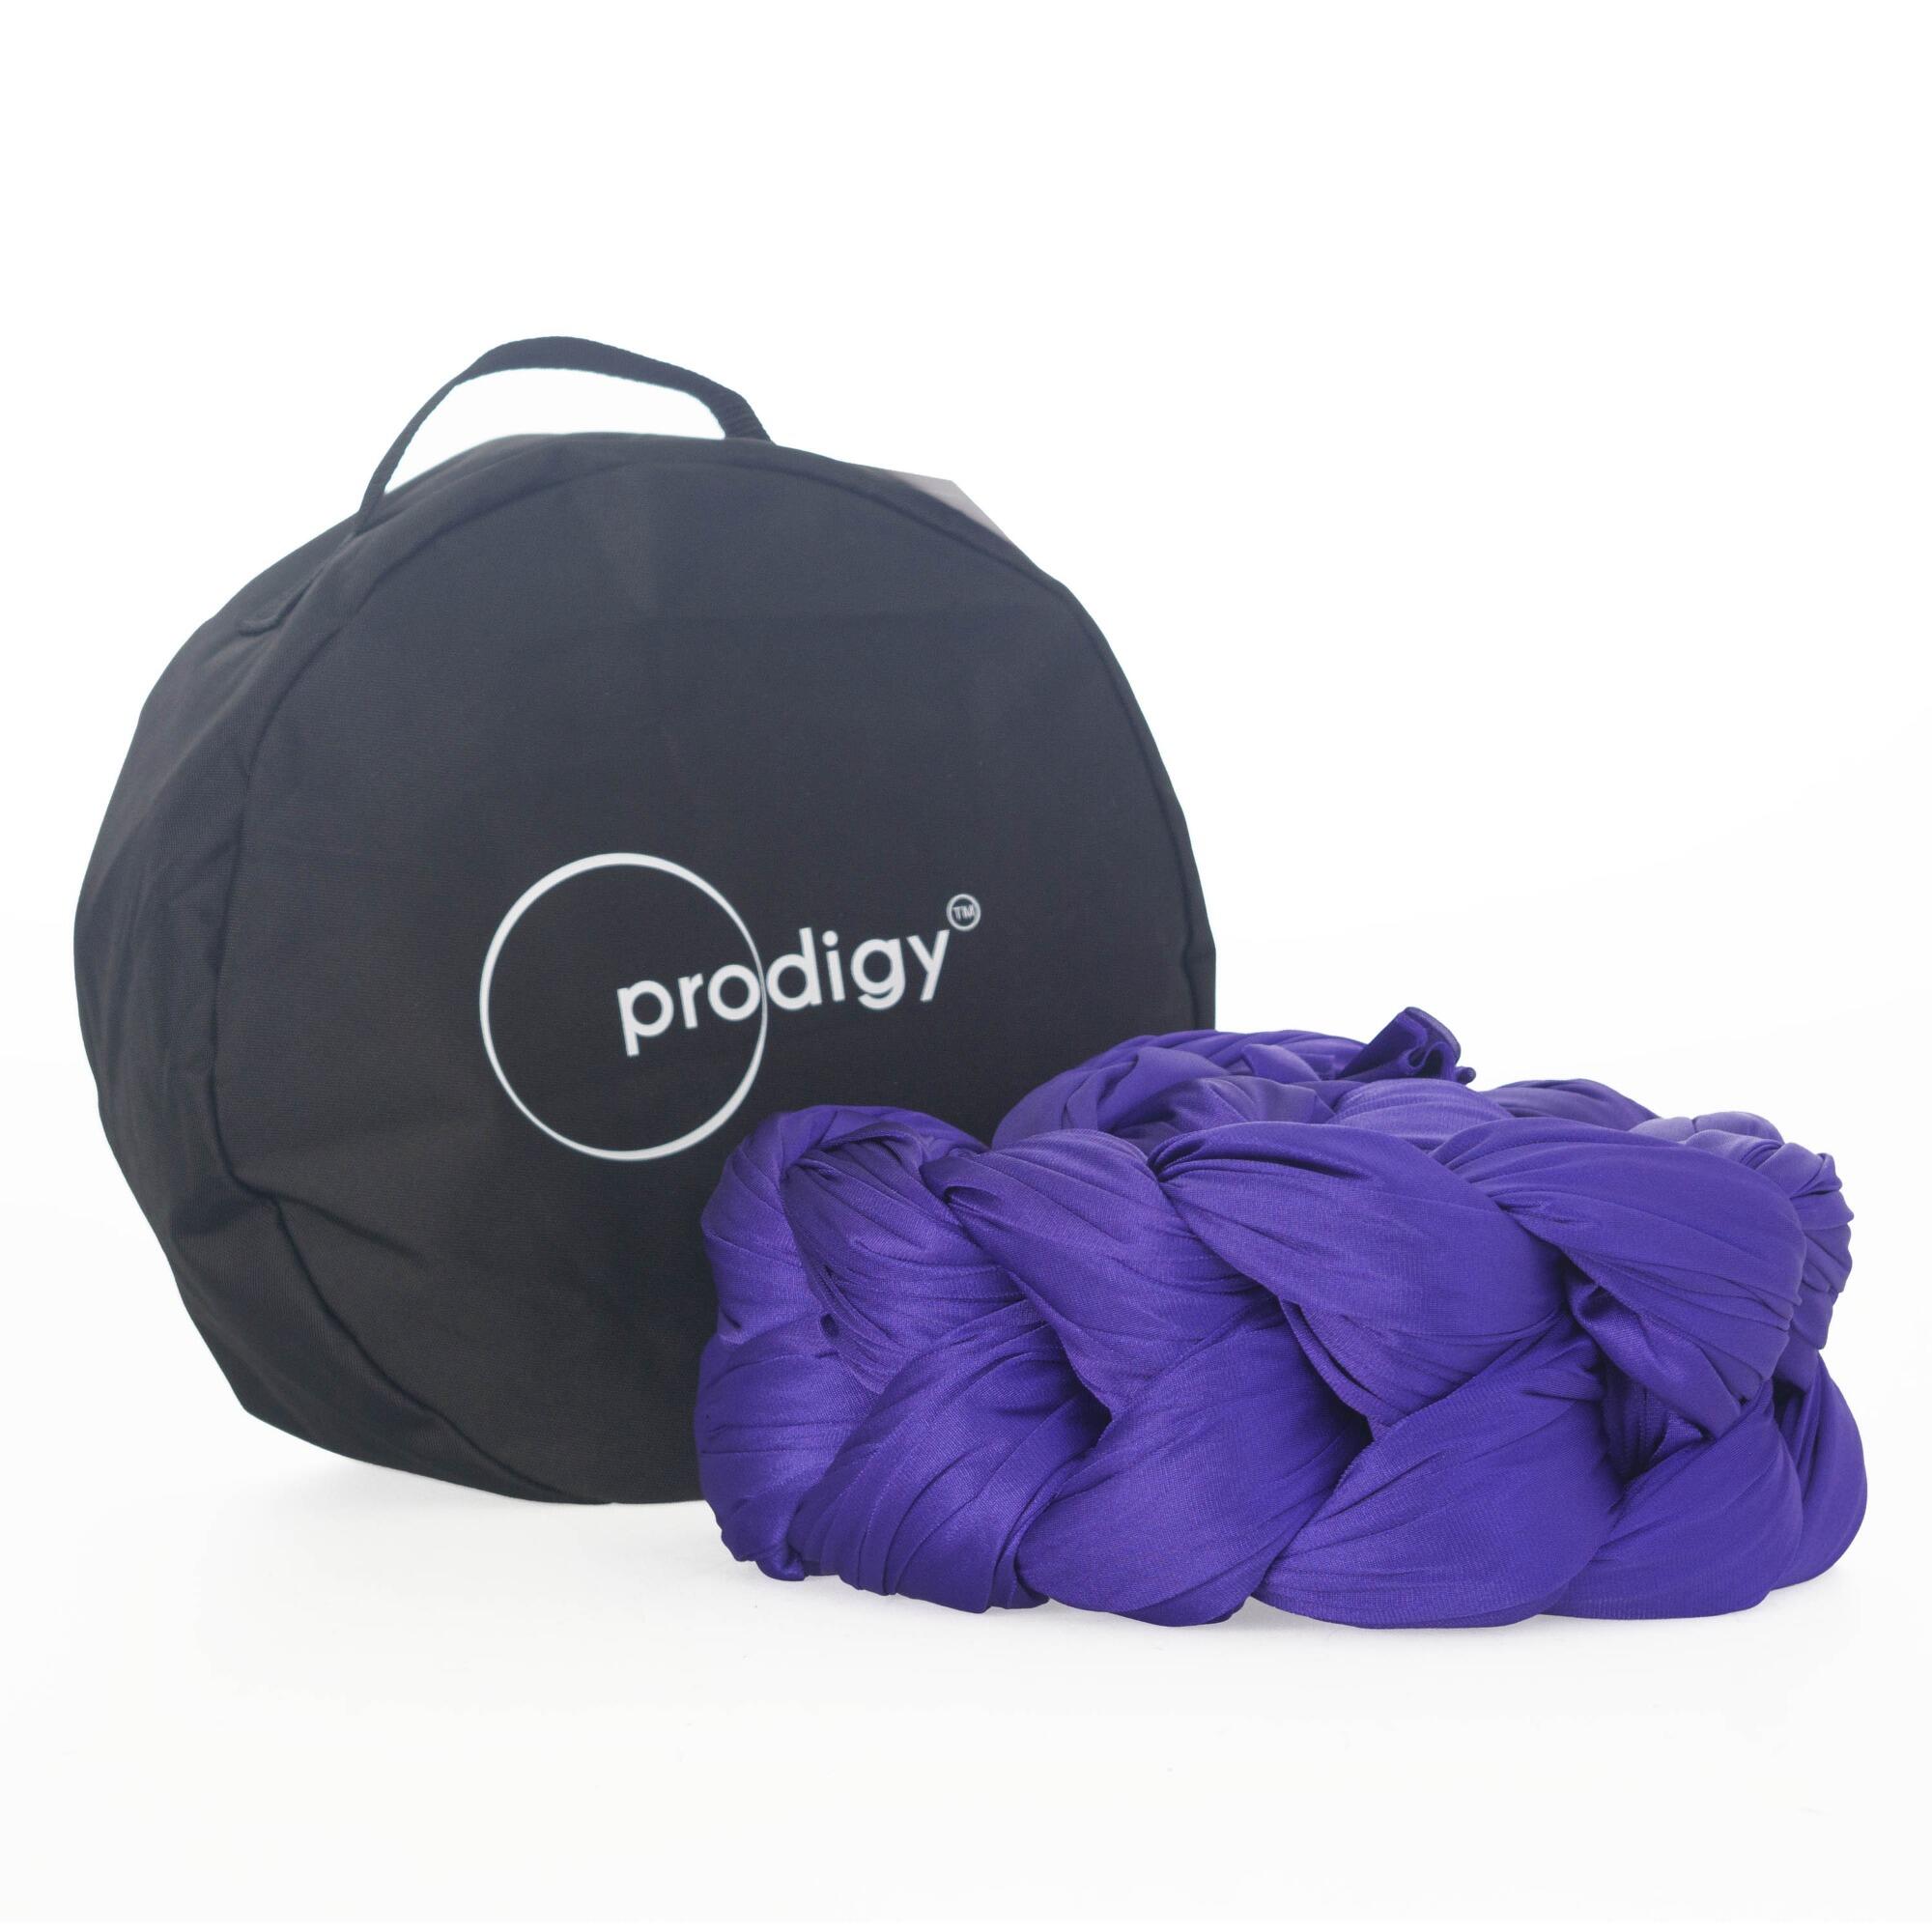 6m Prodigy Aerial Fabric for Hammocks - Purple with round Prodigy bag 1/5